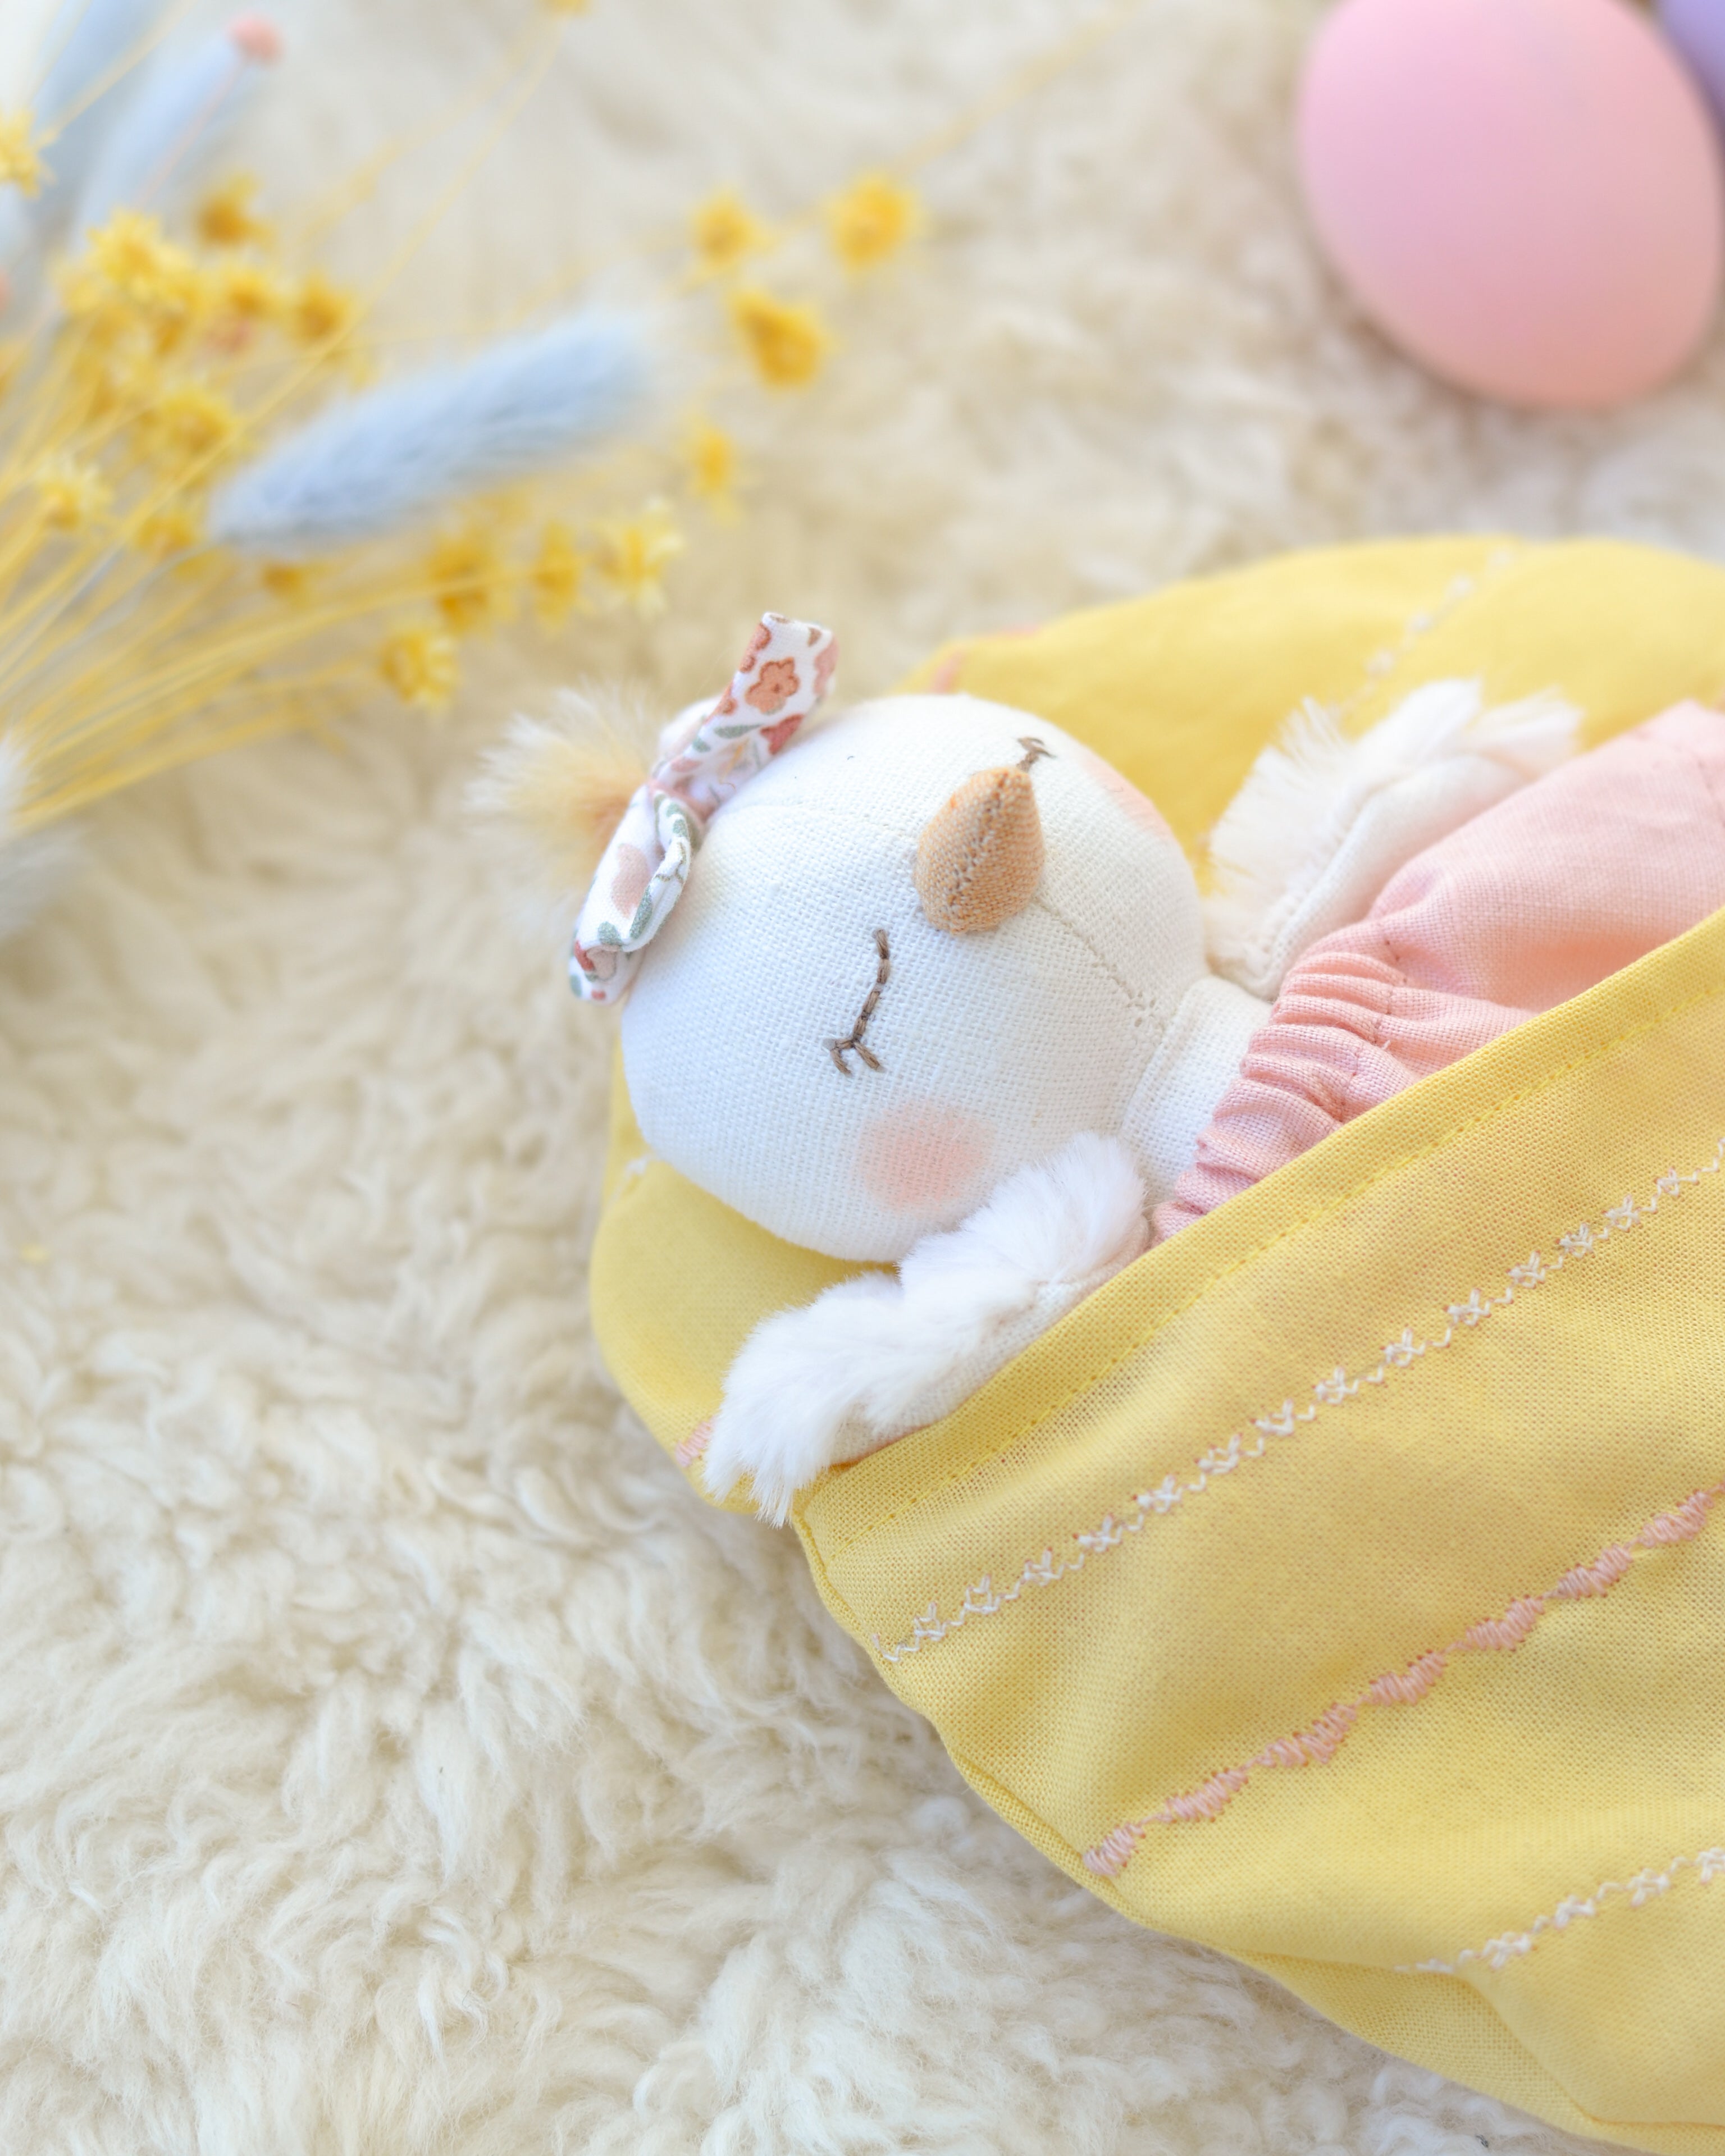 Mini Chick and Easter Egg-shaped Bed yellow